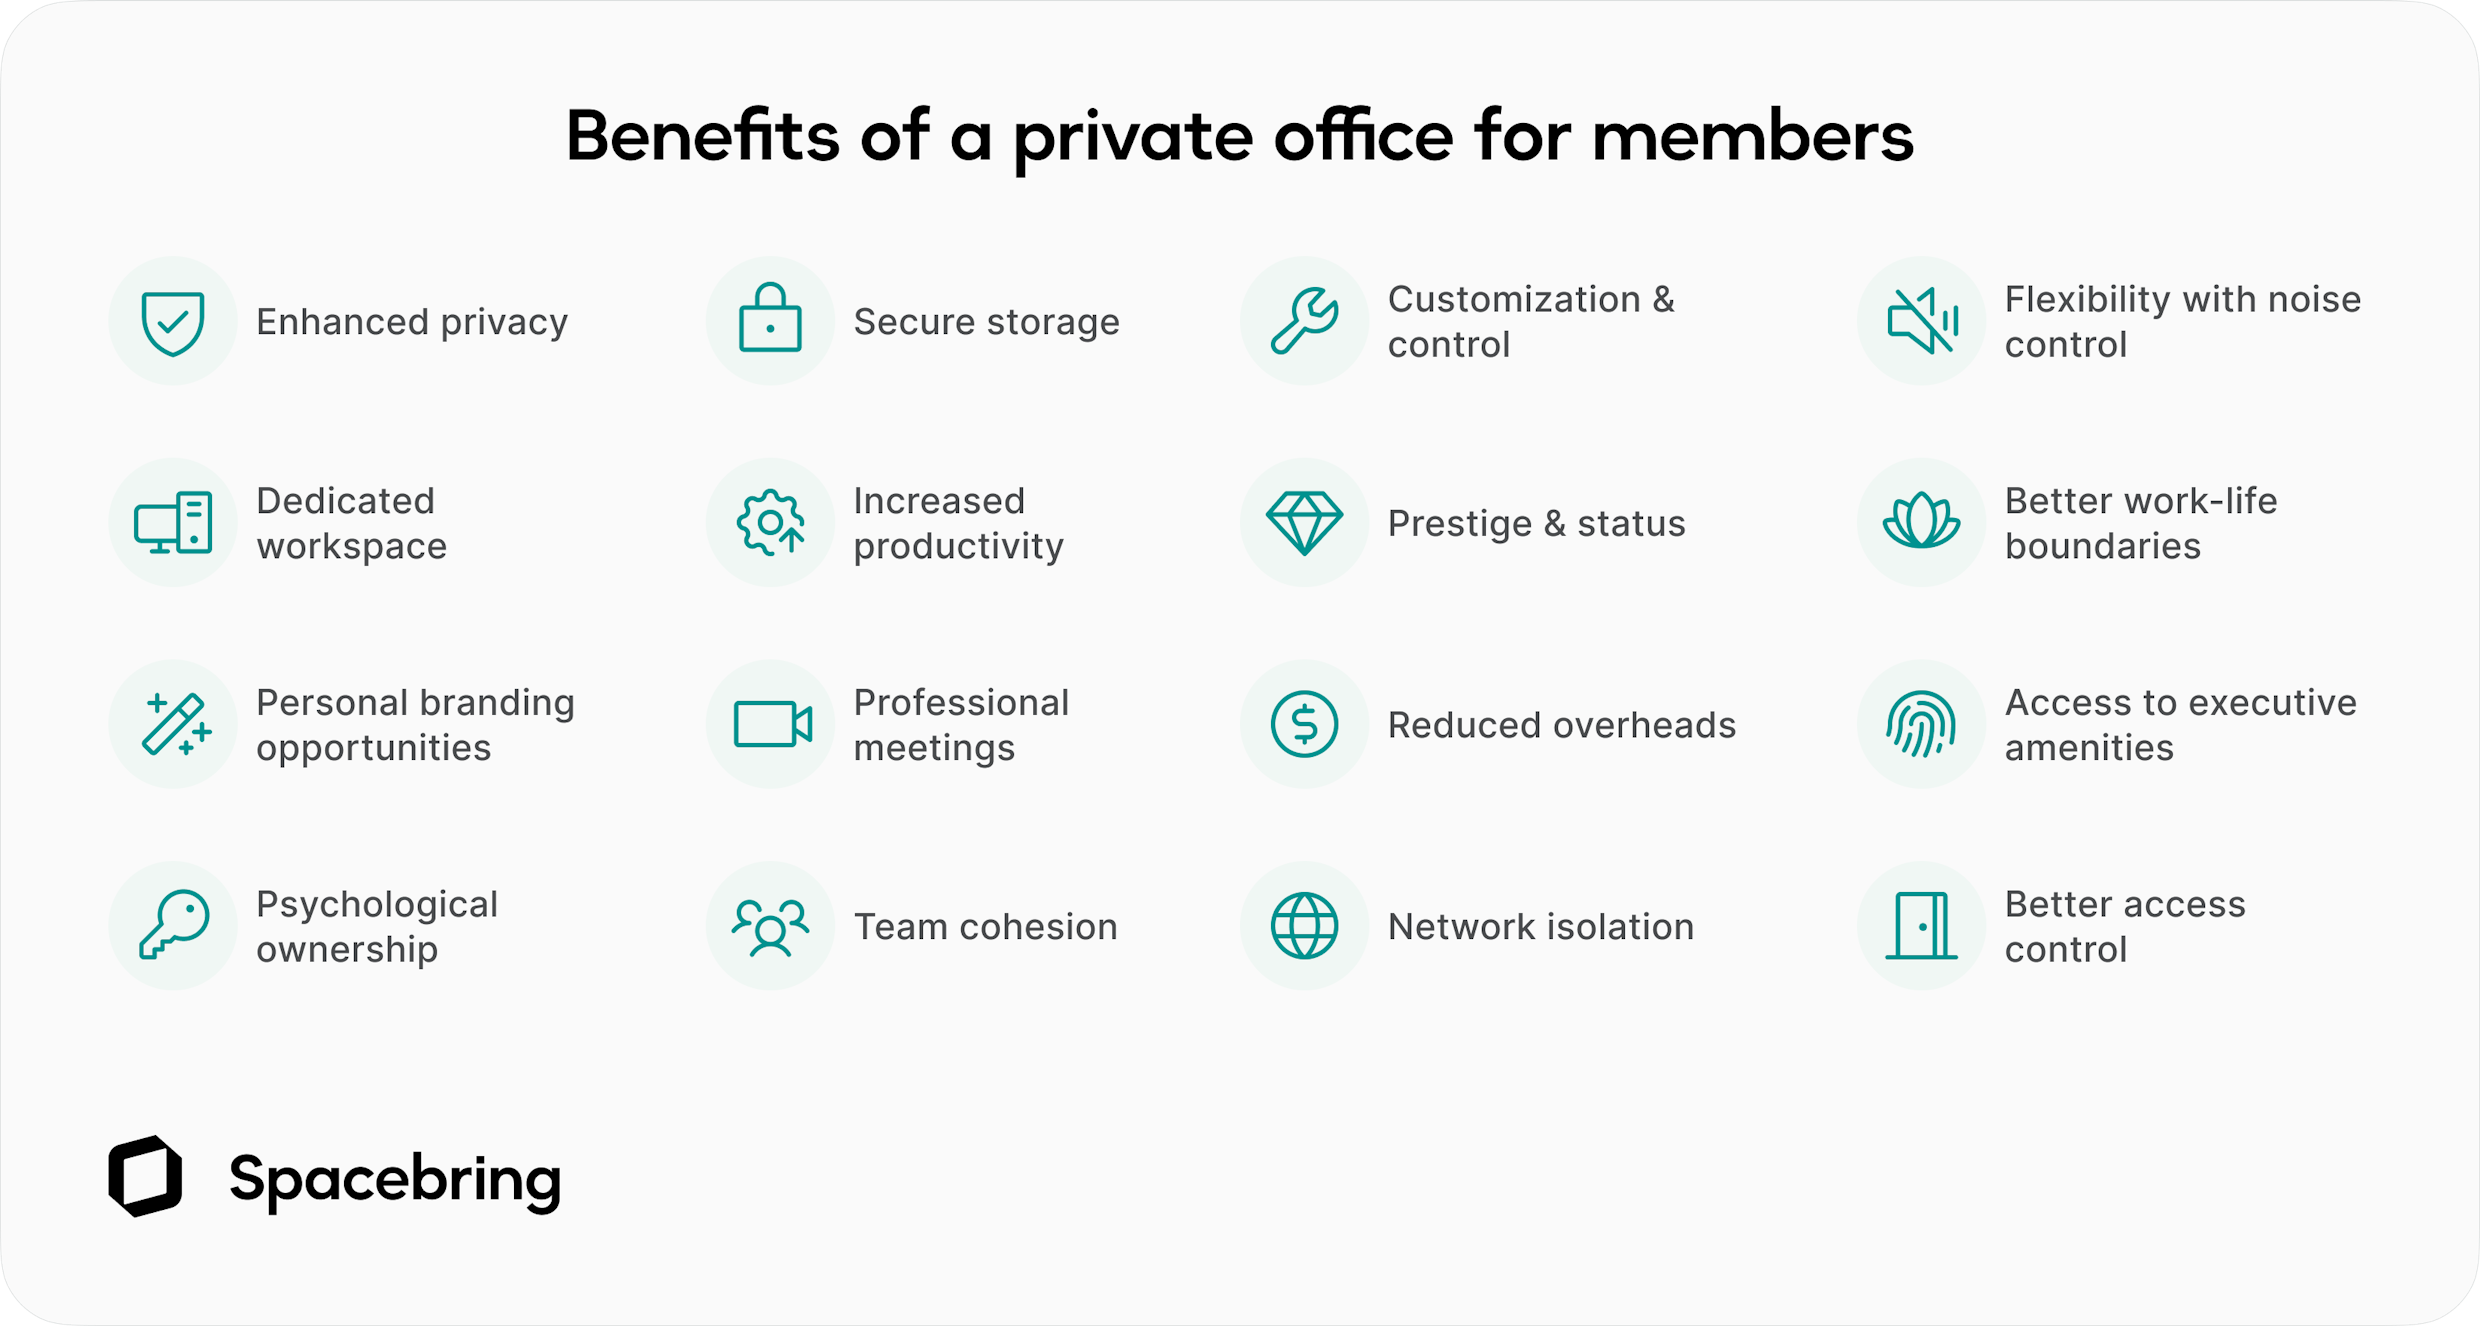 Benefits of private offices for coworking space members